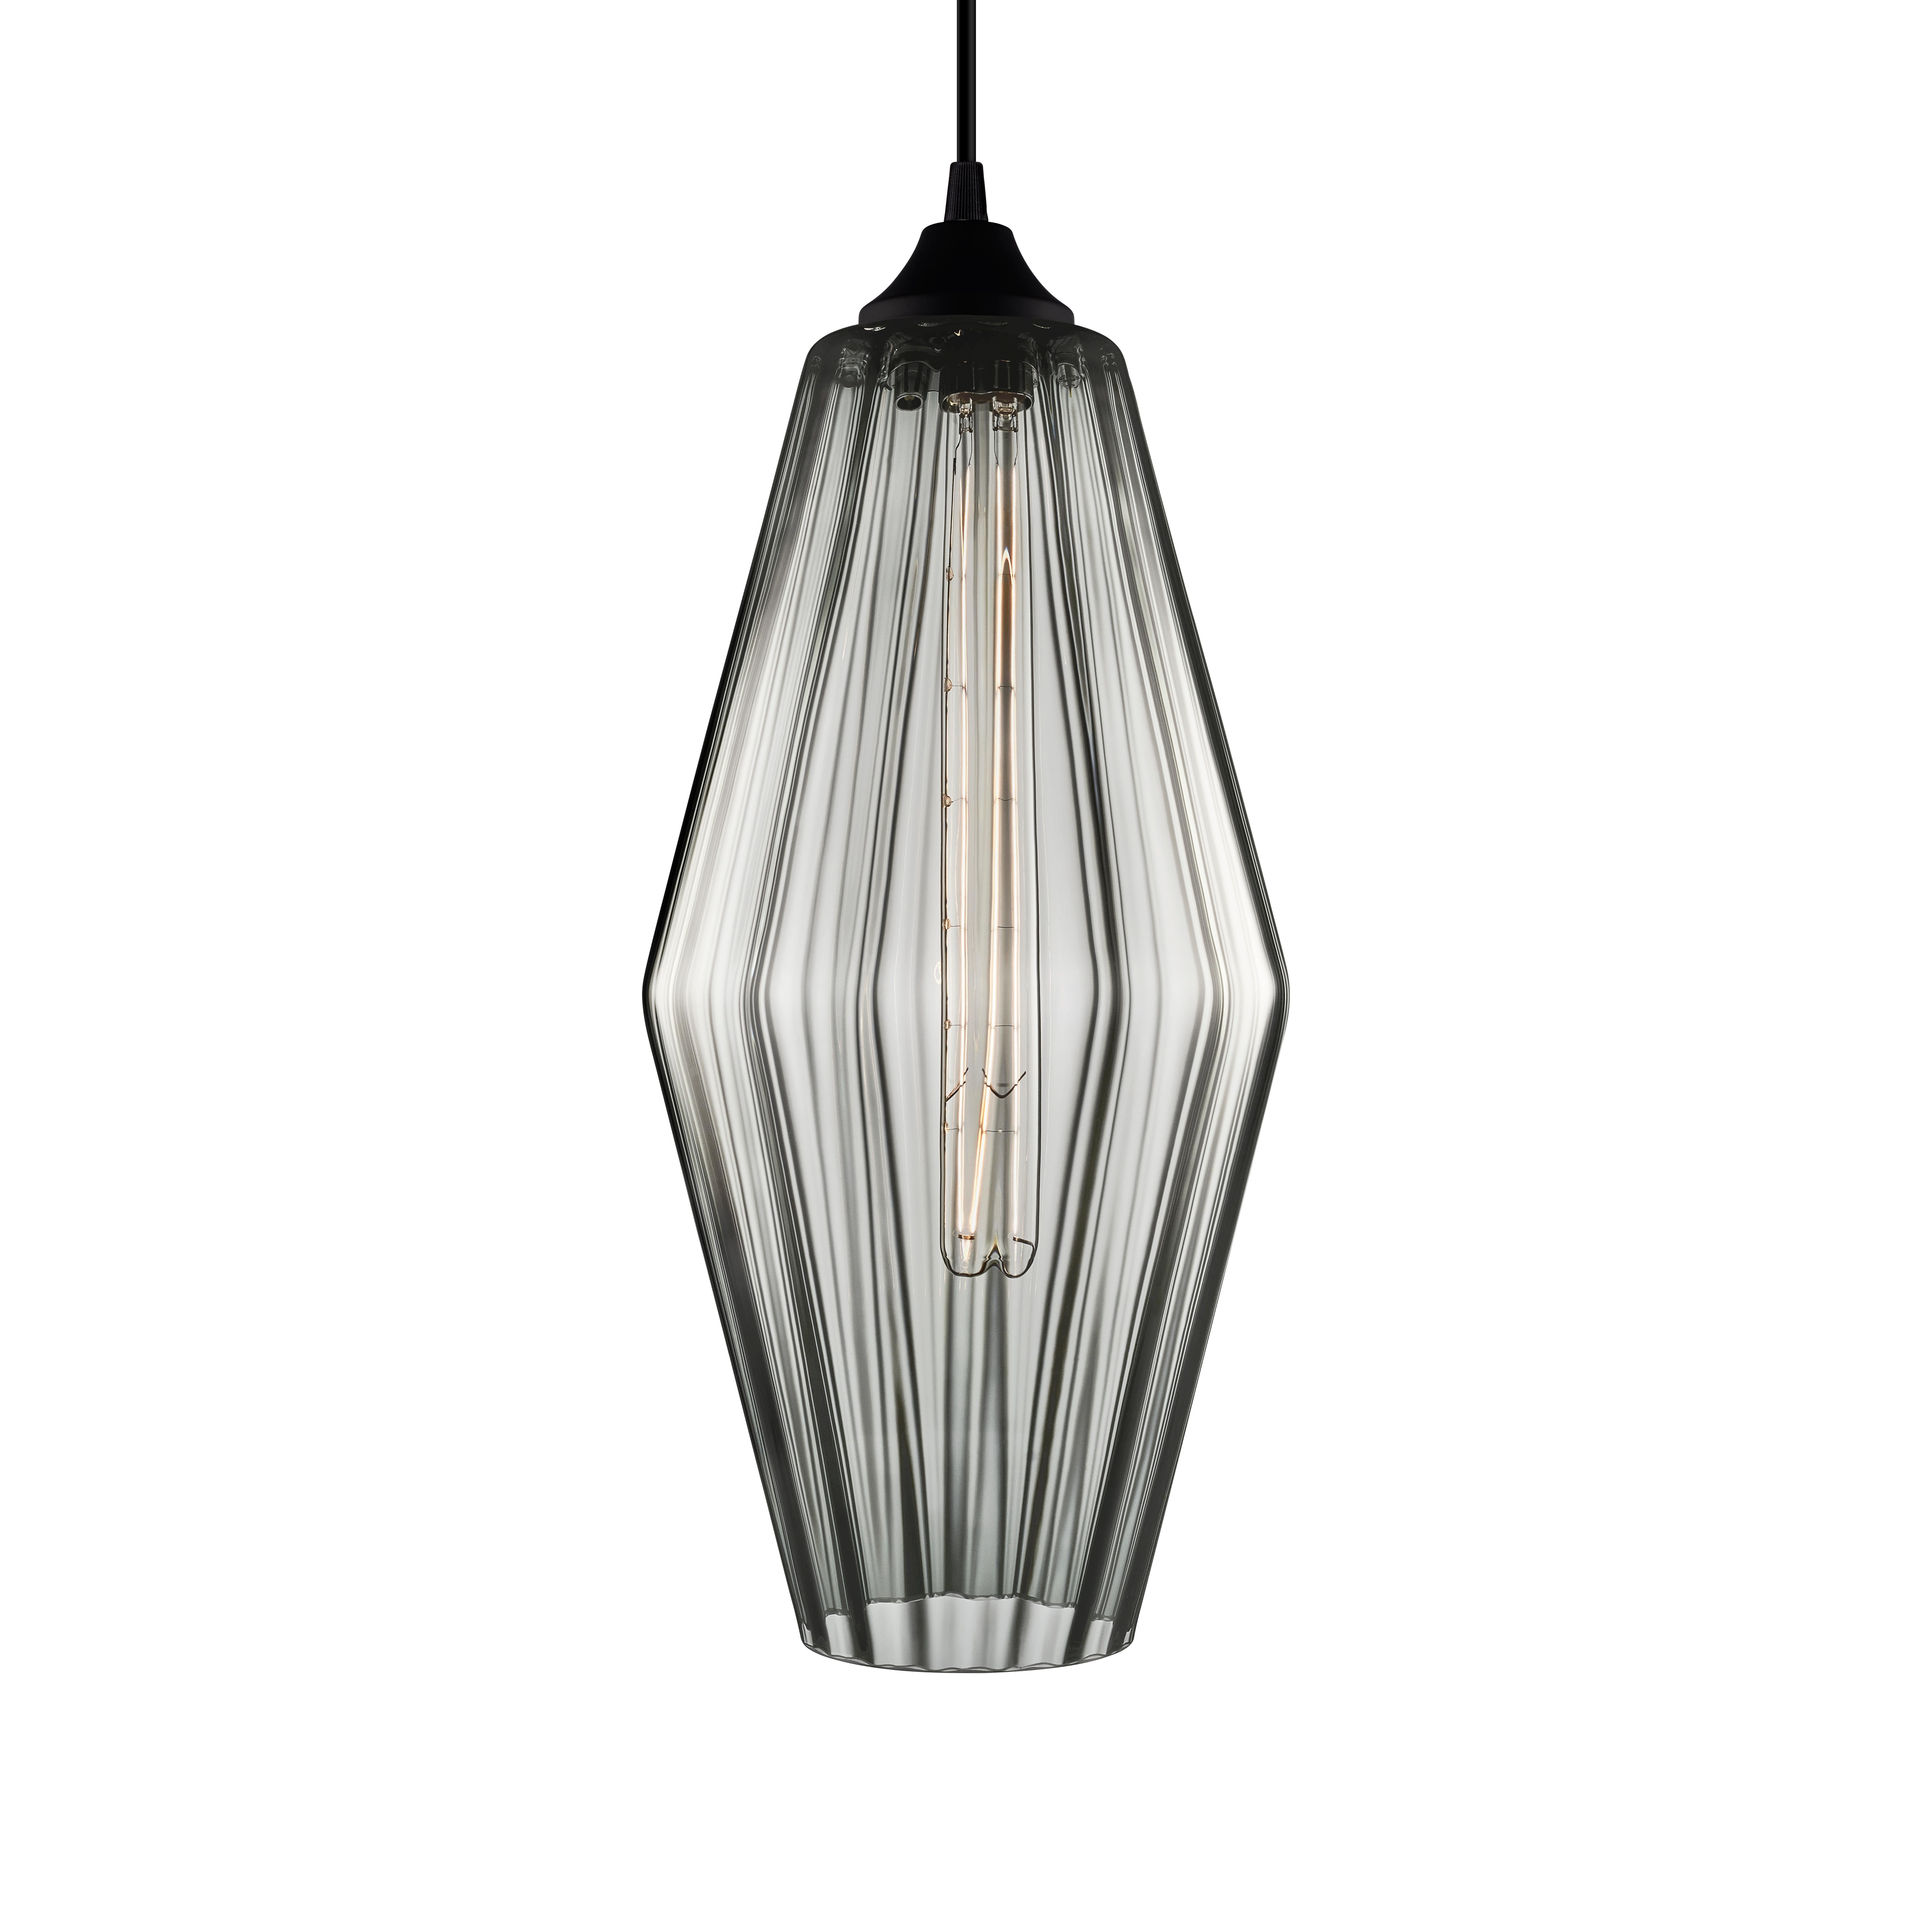 American Marquise Grand Gray Handblown Modern Glass Pendant Light, Made in the USA For Sale